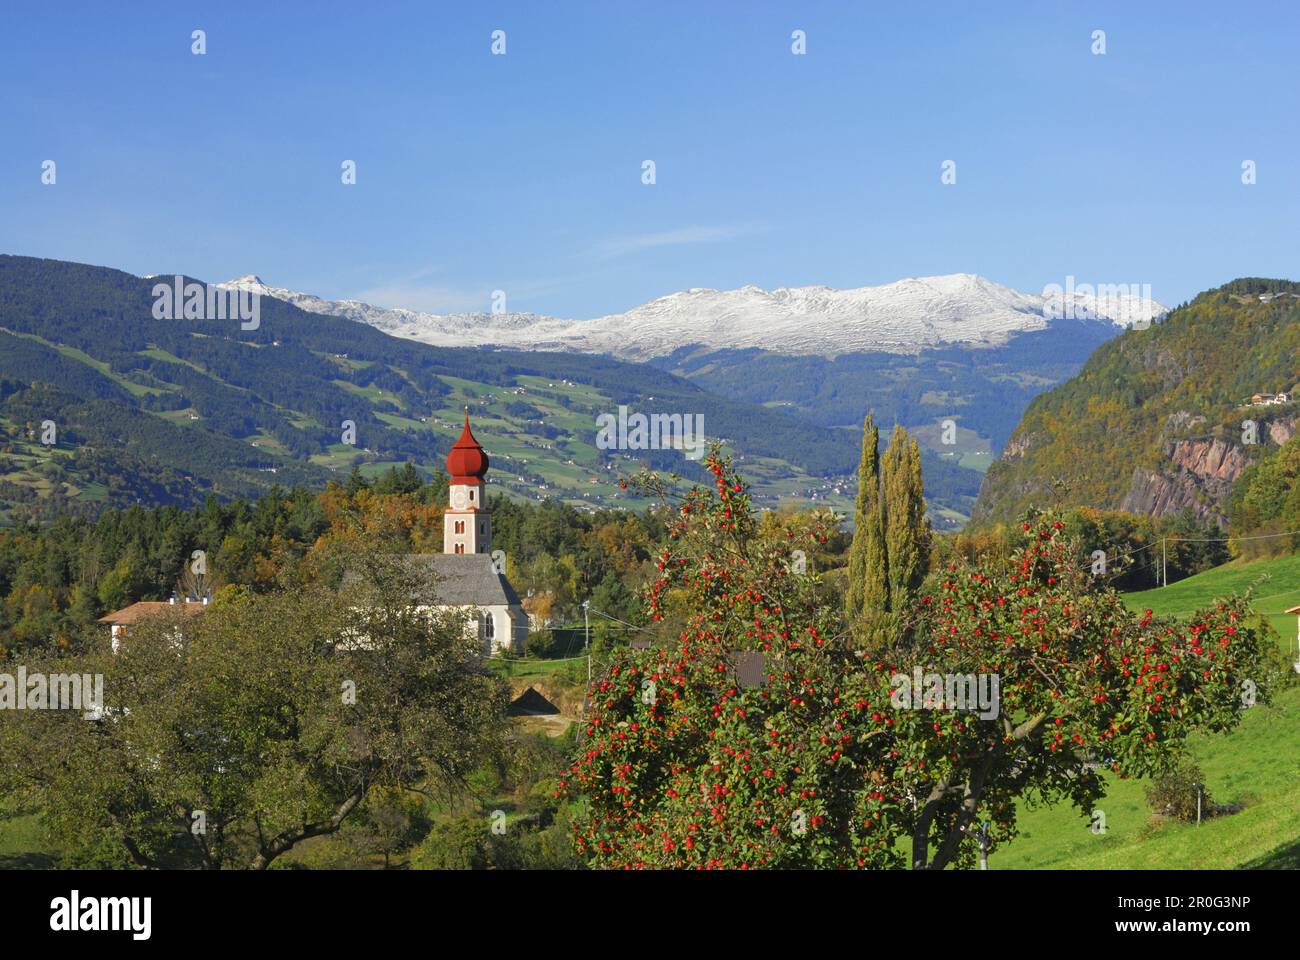 View over Eisack Valley with apple tree and church tower, Dolomites, South Tyrol, Italy Stock Photo